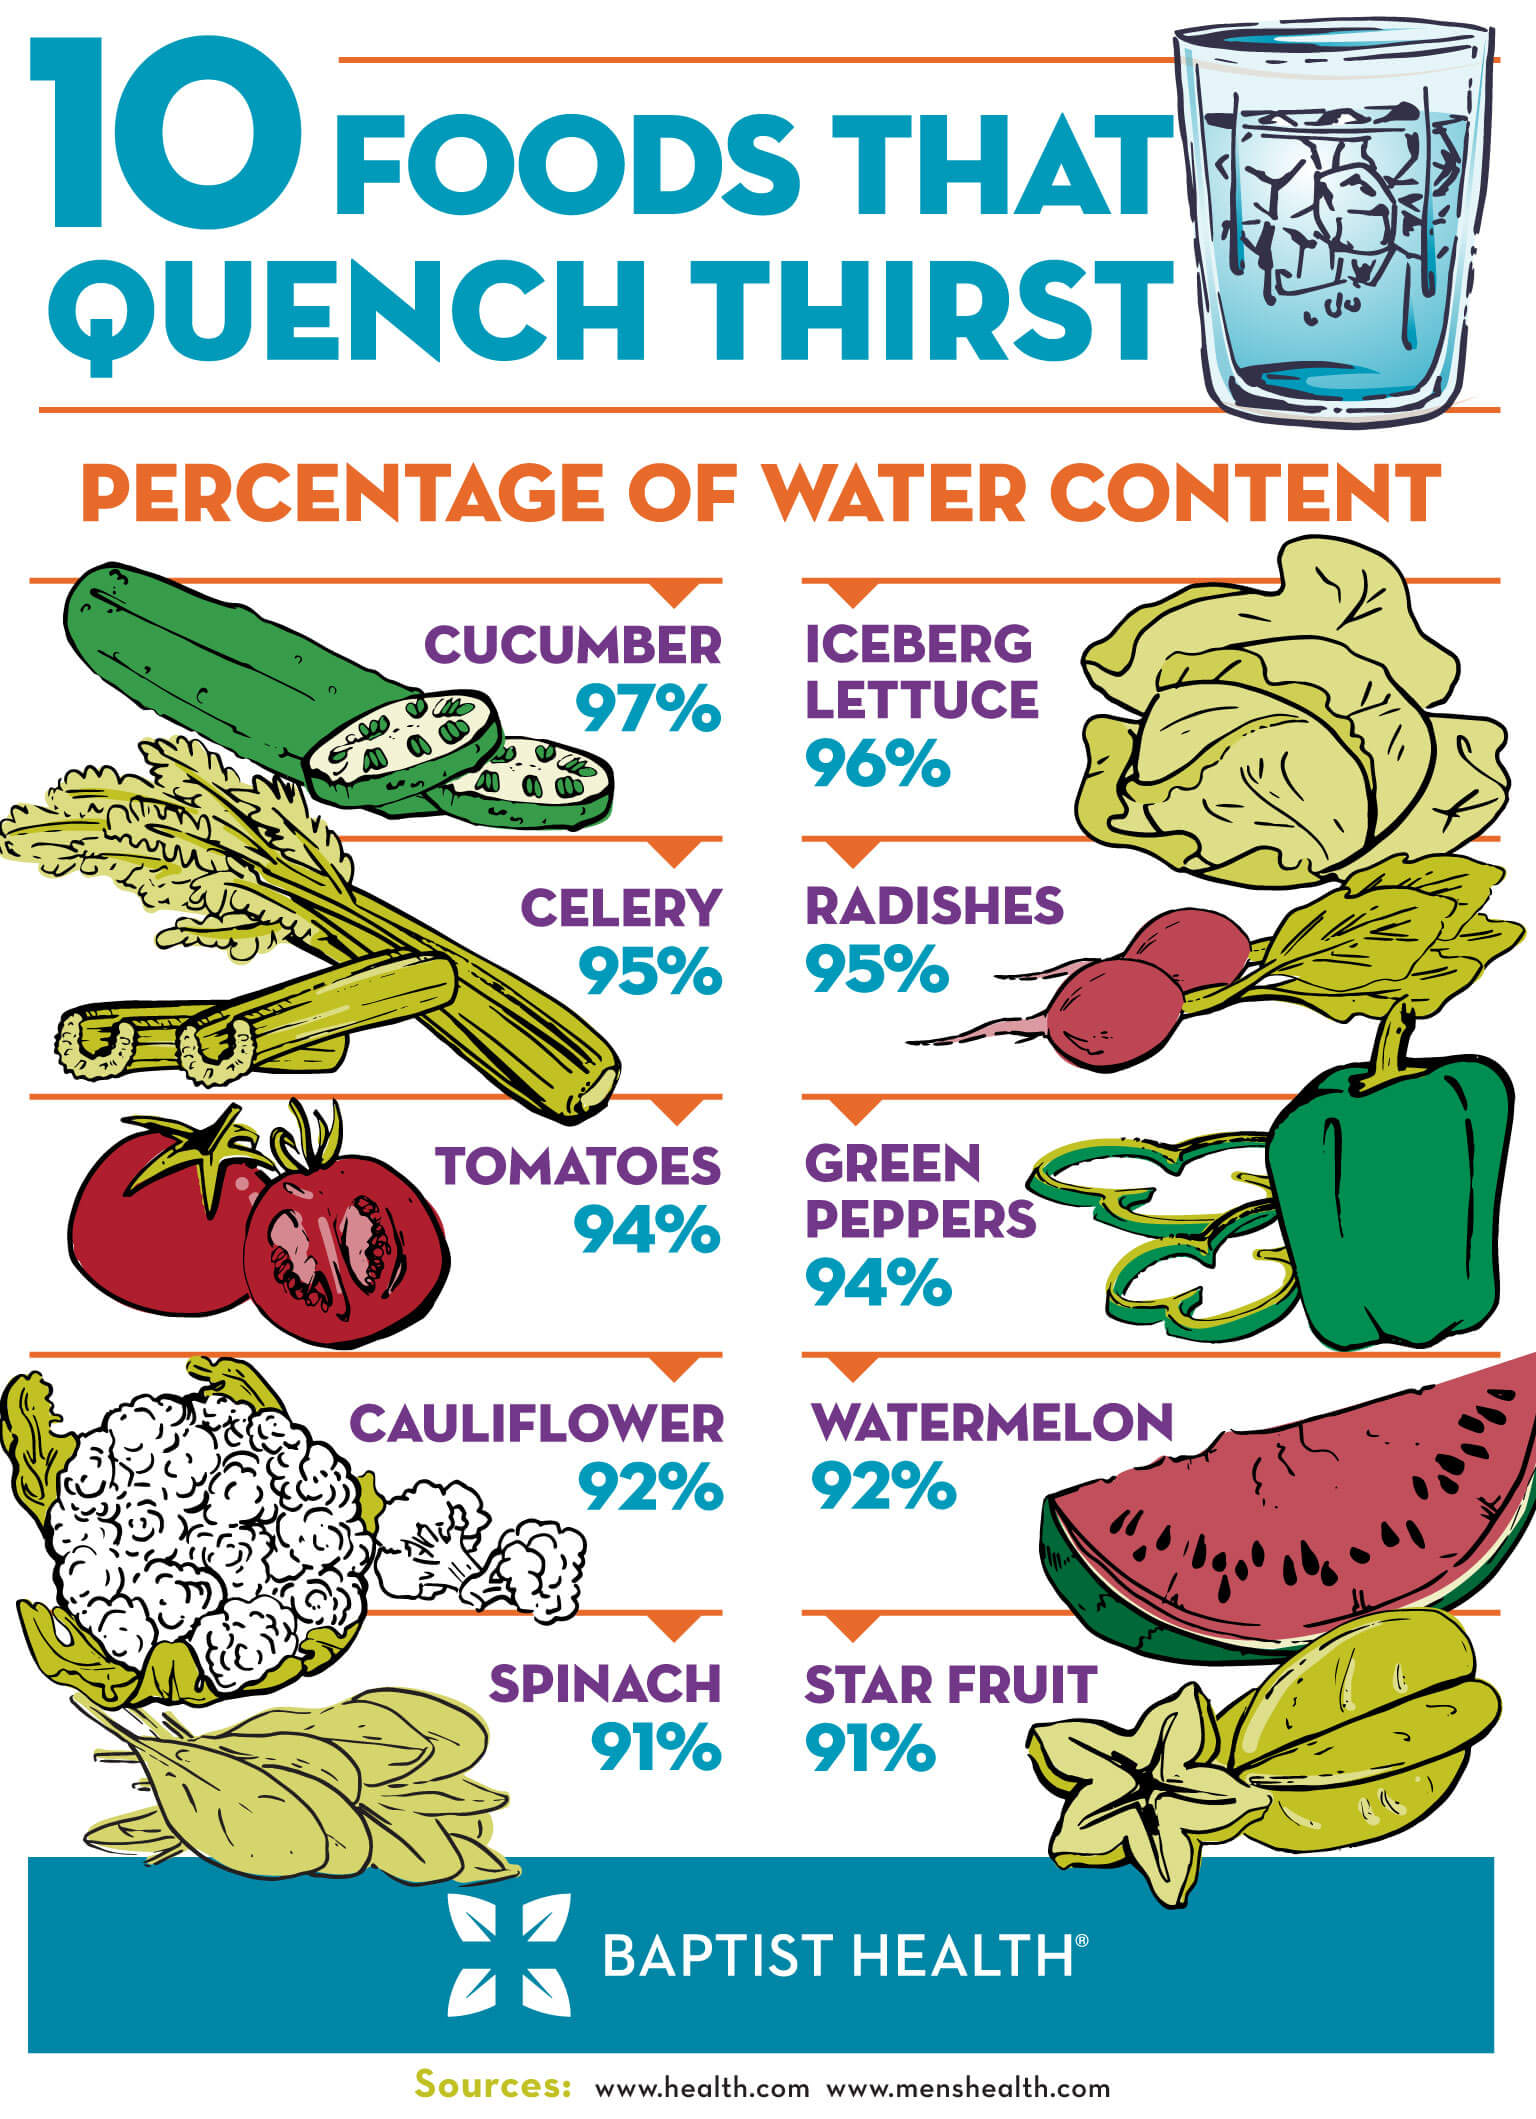 10-foods-to-quench-thirst-infographic